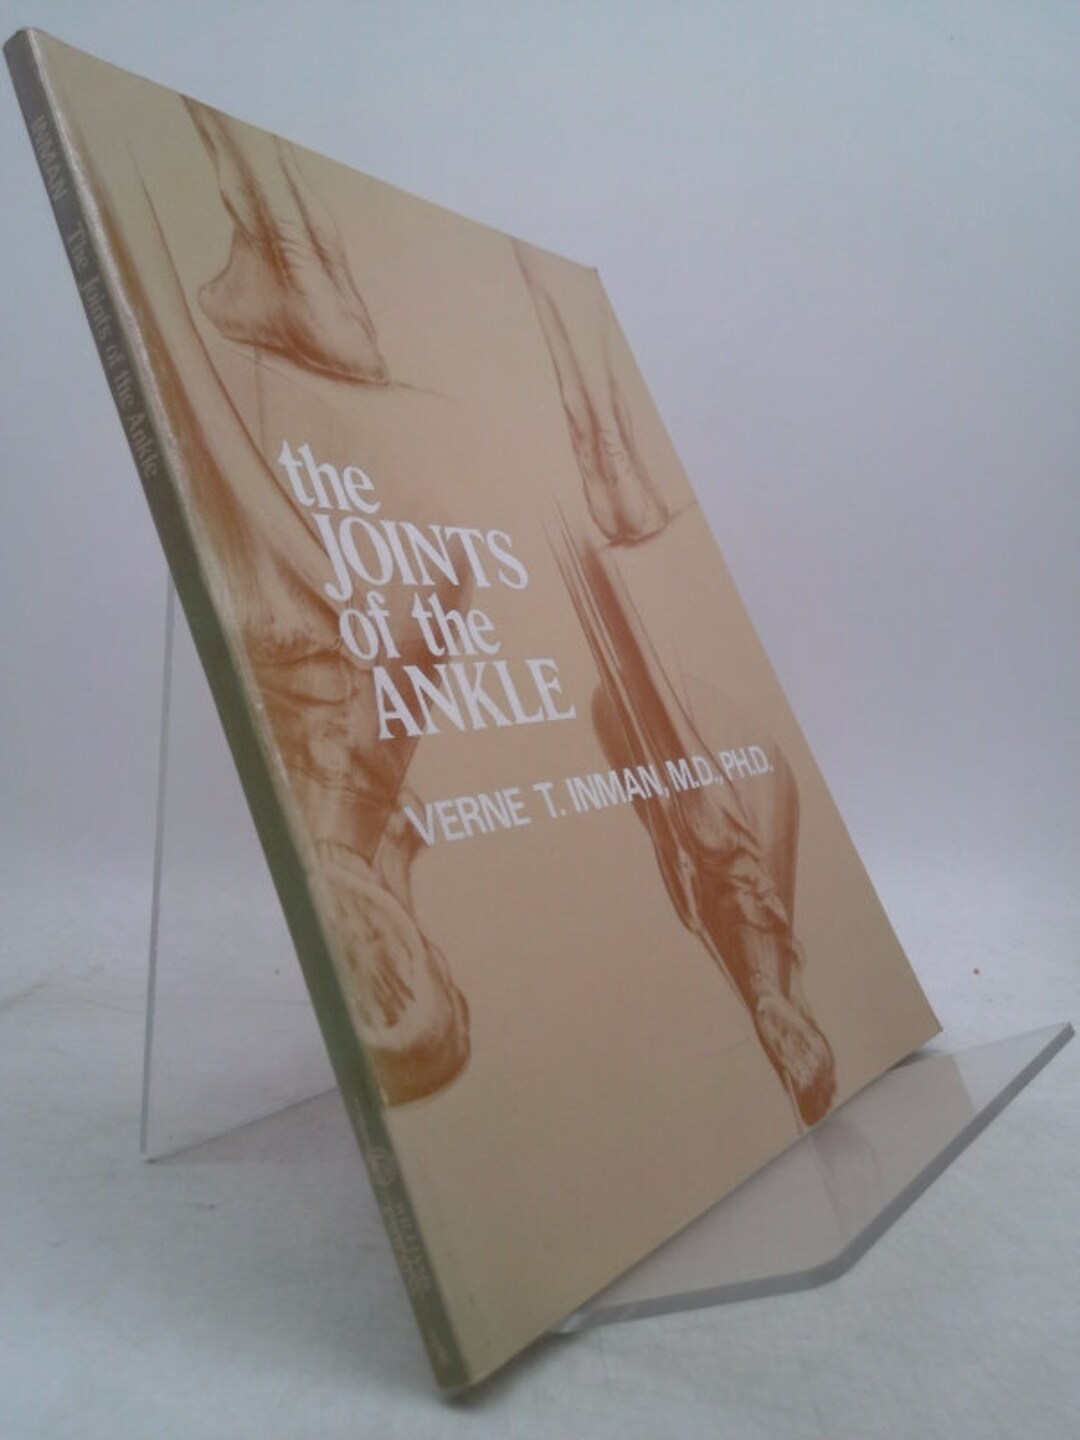 The Joints of the Ankle by Verne Thompson Inman - Etsy